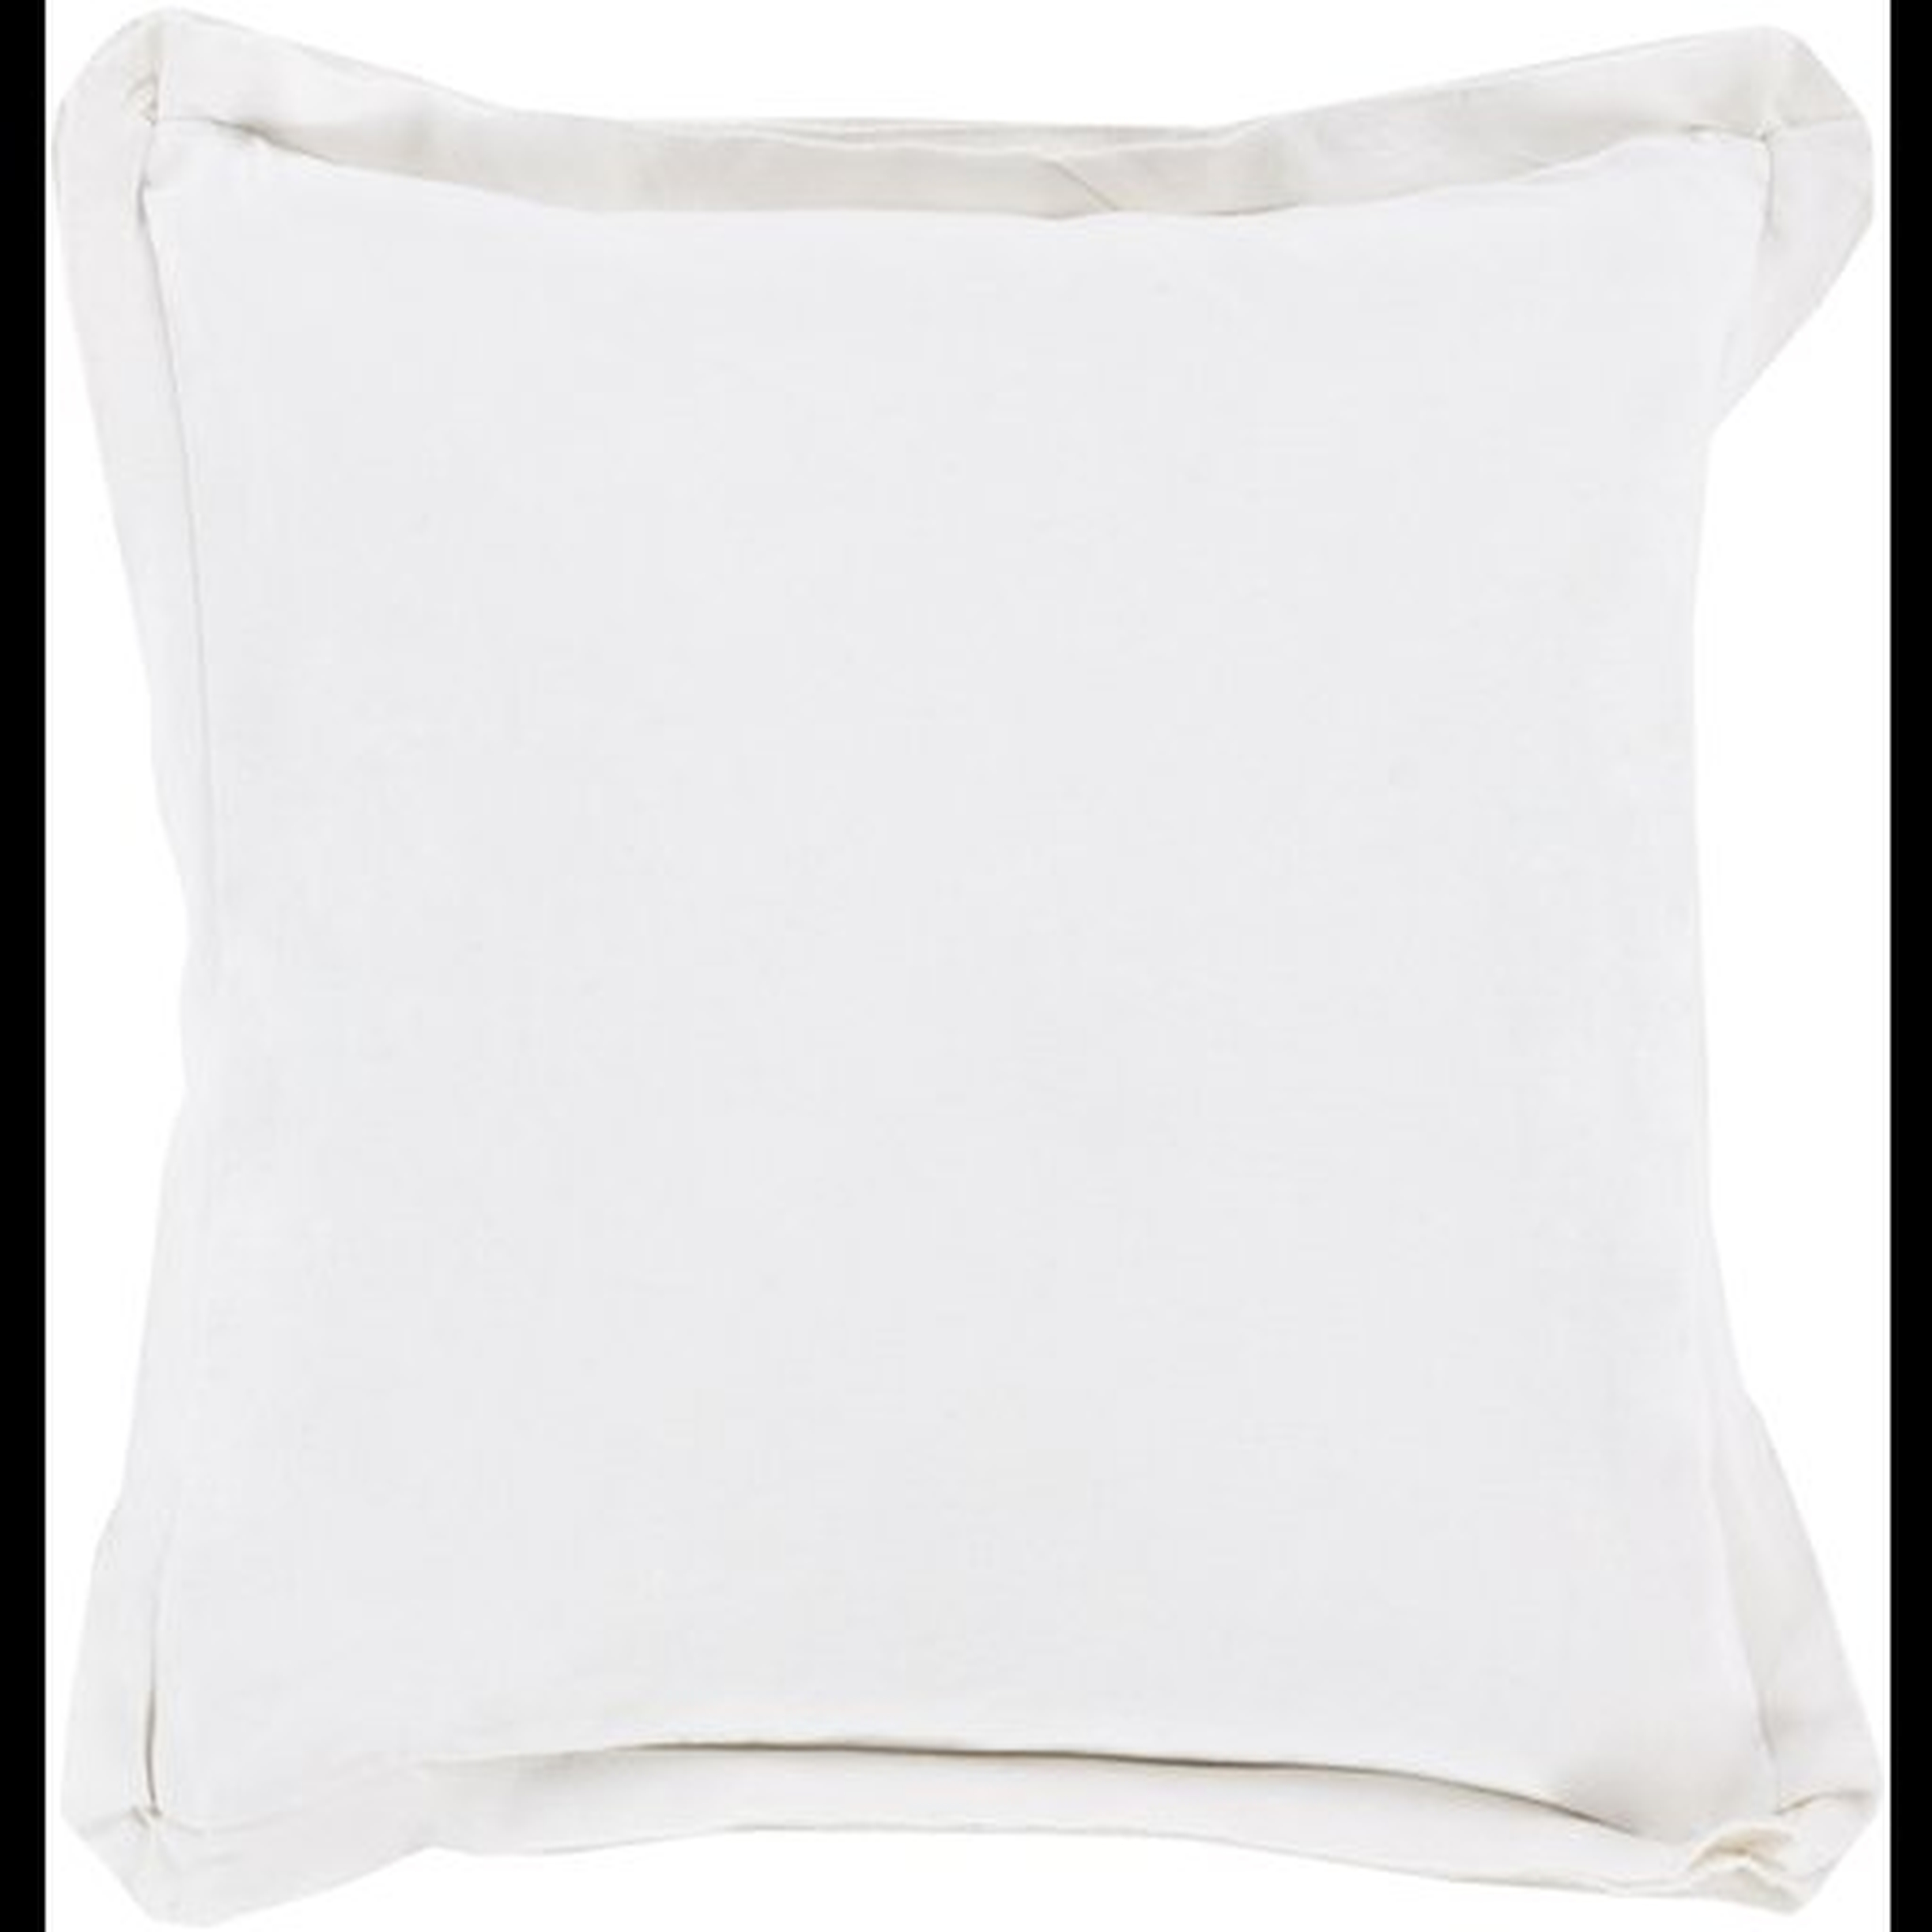 Triple Flange Throw Pillow, 18" x 18", with poly insert - Surya